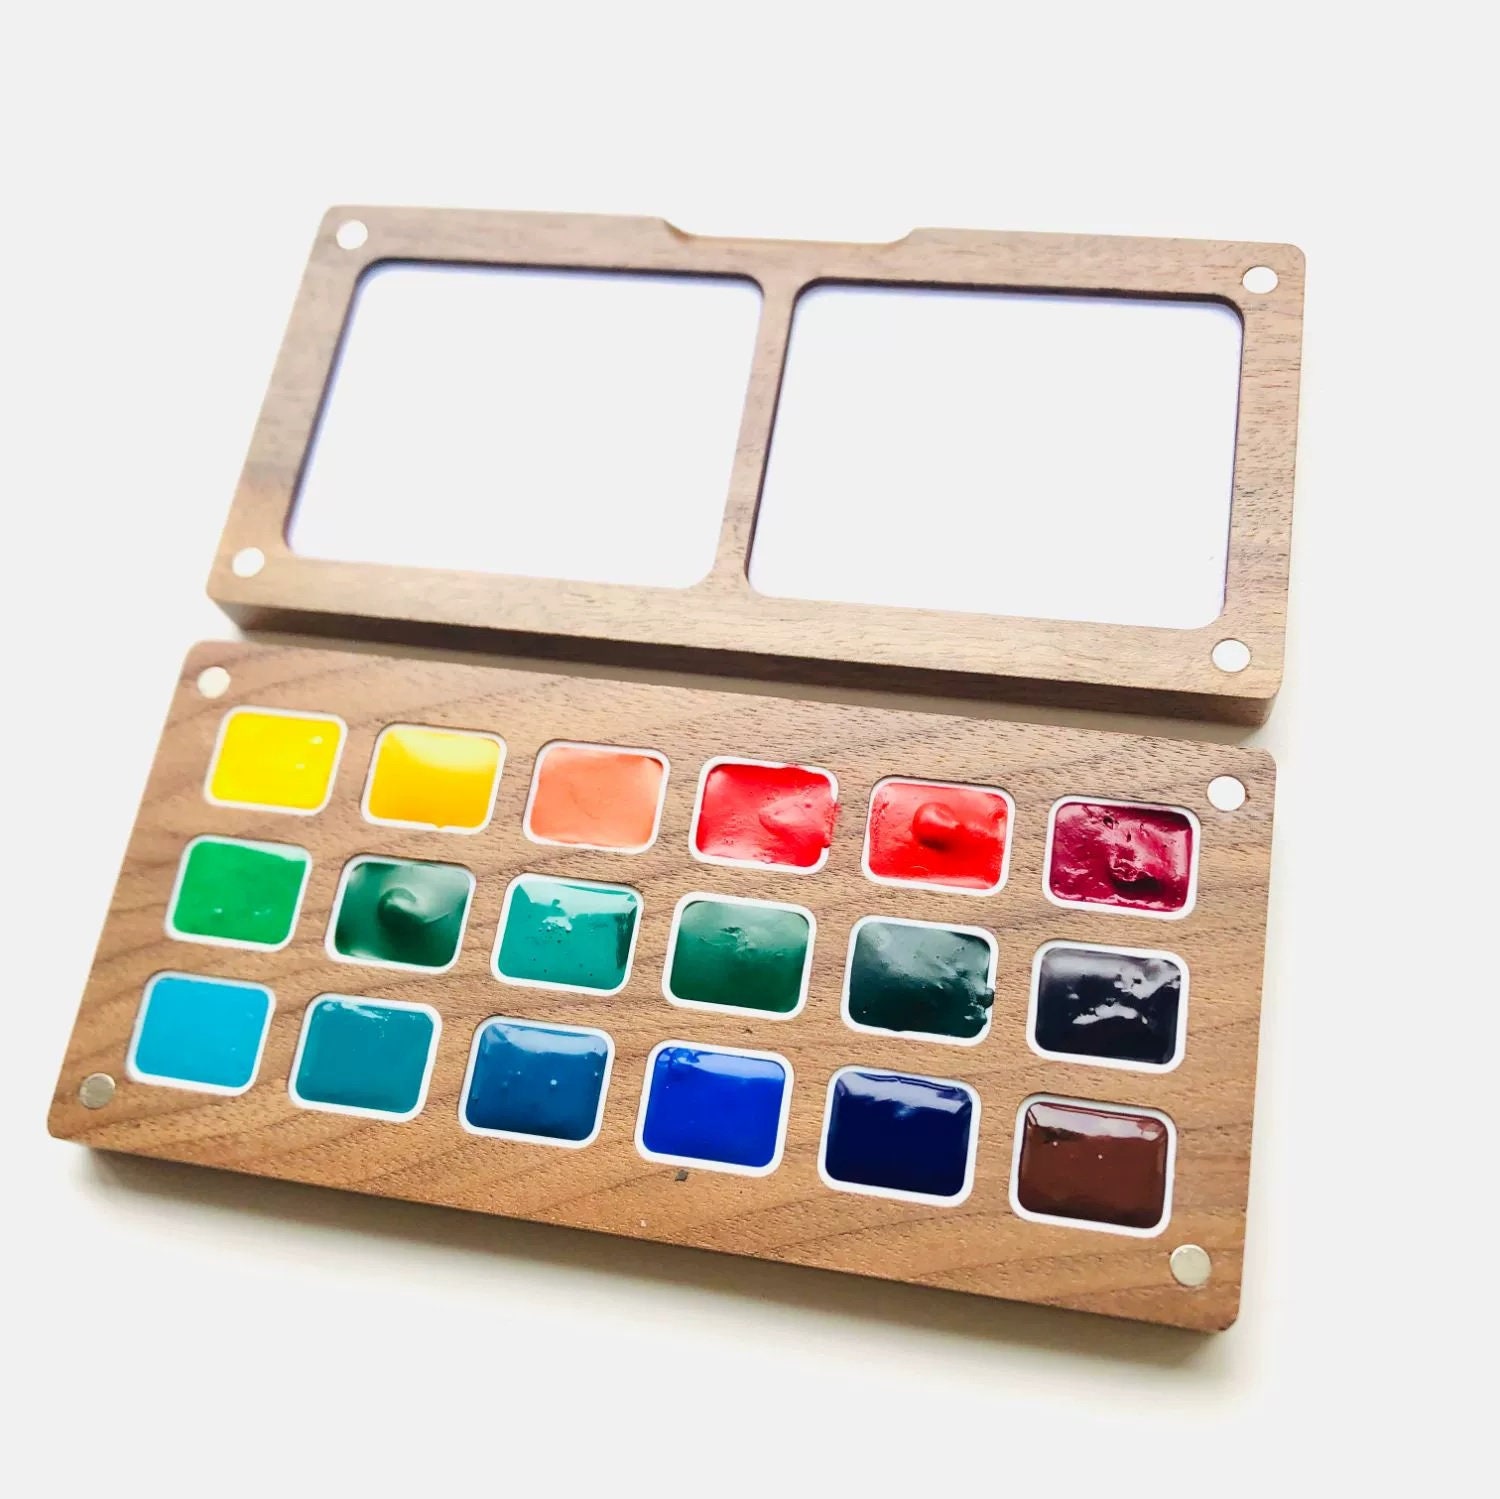 Suimolly Travel Portable Ceramic Watercolor Palette 12 Well, Gift for  Painters, Ceramic Palette, Porcelain Palette 